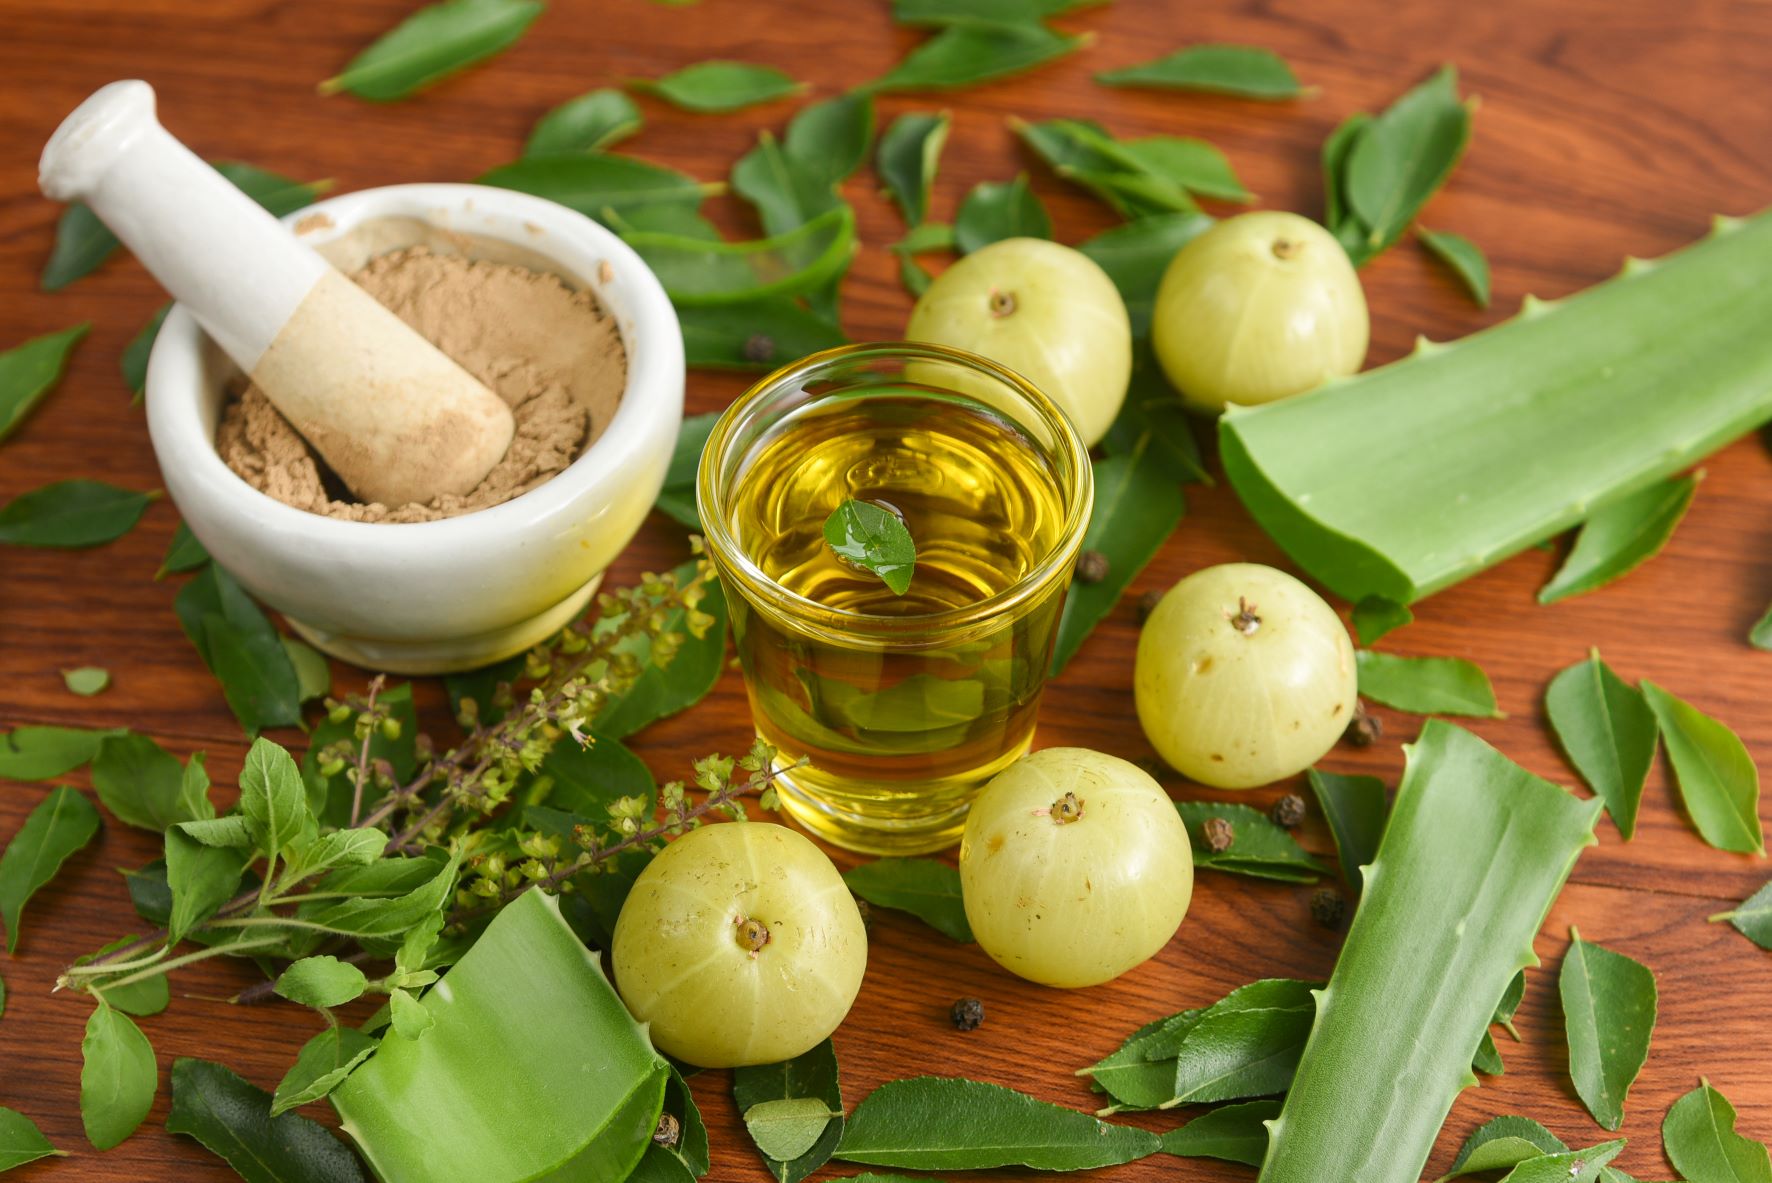 How to Use Amla for Hair Growth - MDhairmixtress